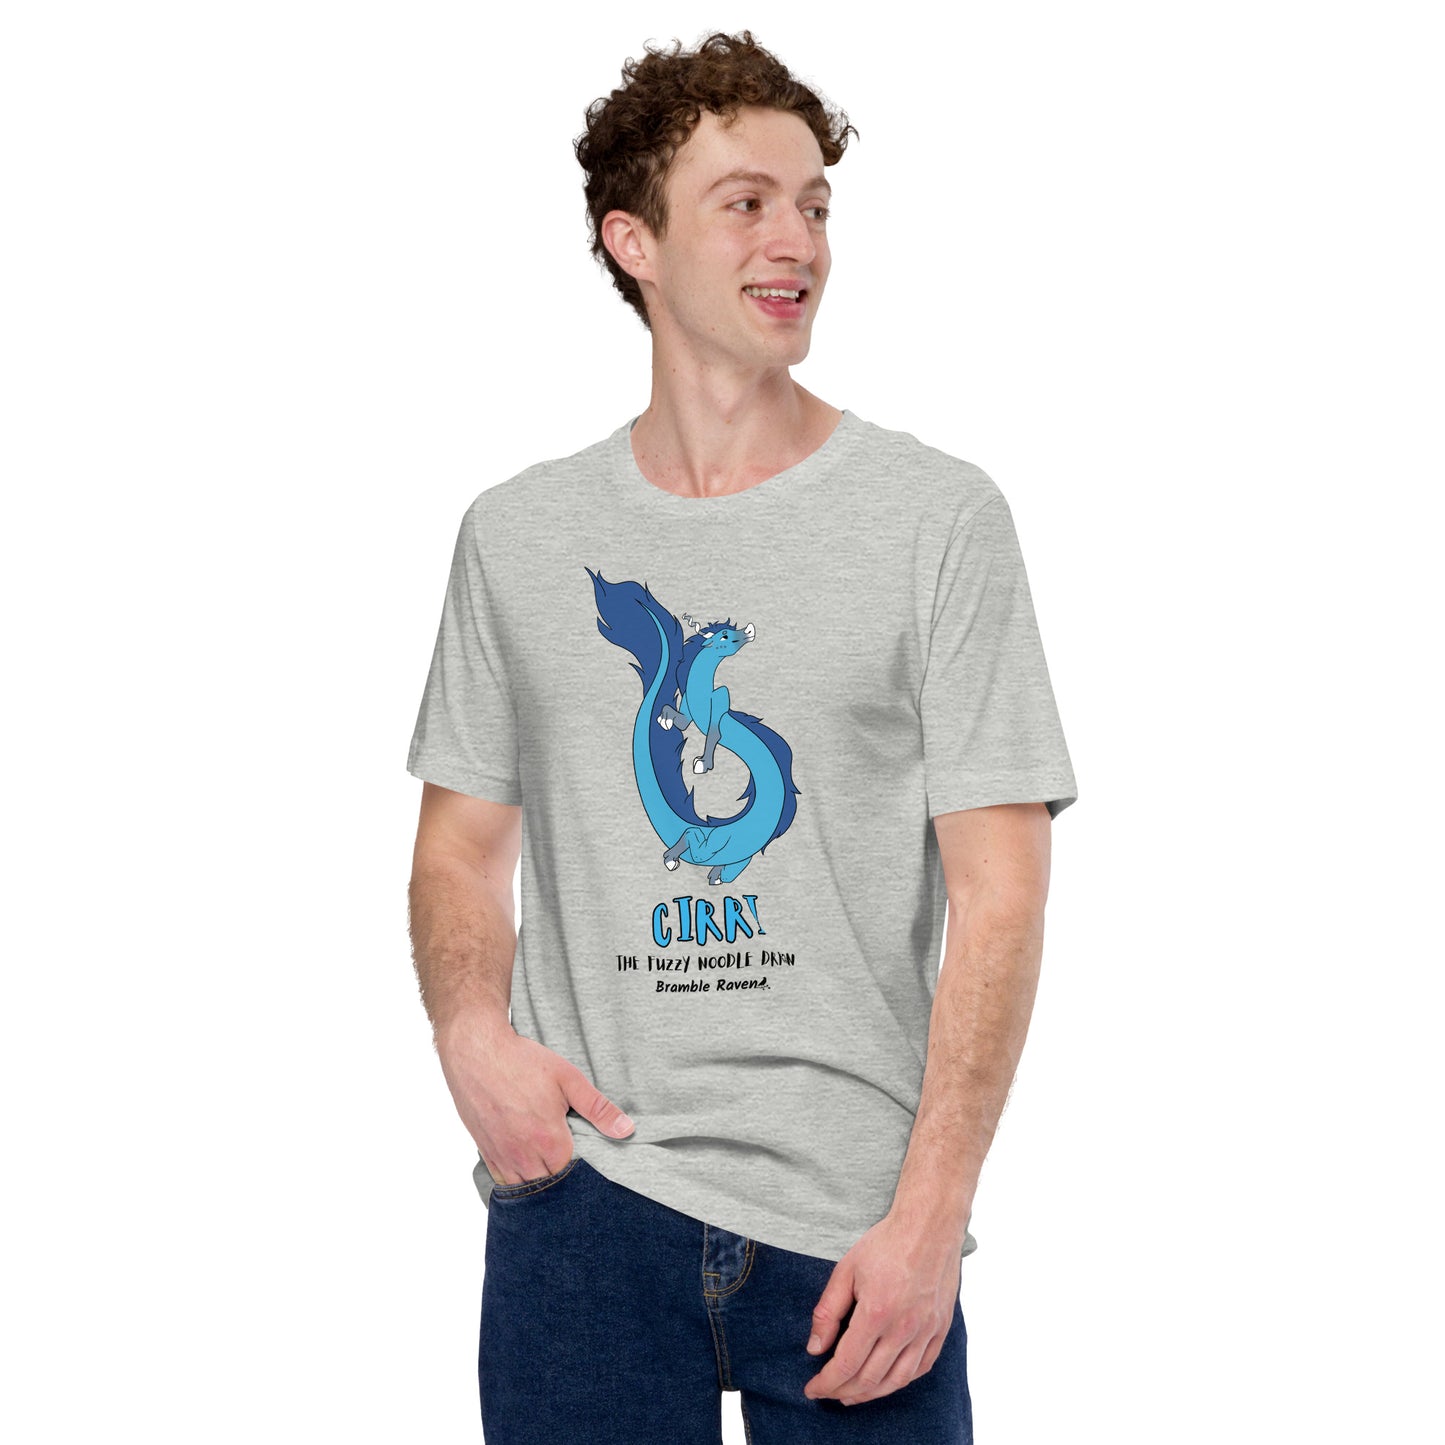 Cirri the Fuzzy Noodle Dragon on an athletic heather grey unisex t-shirt. Shown on a male model.